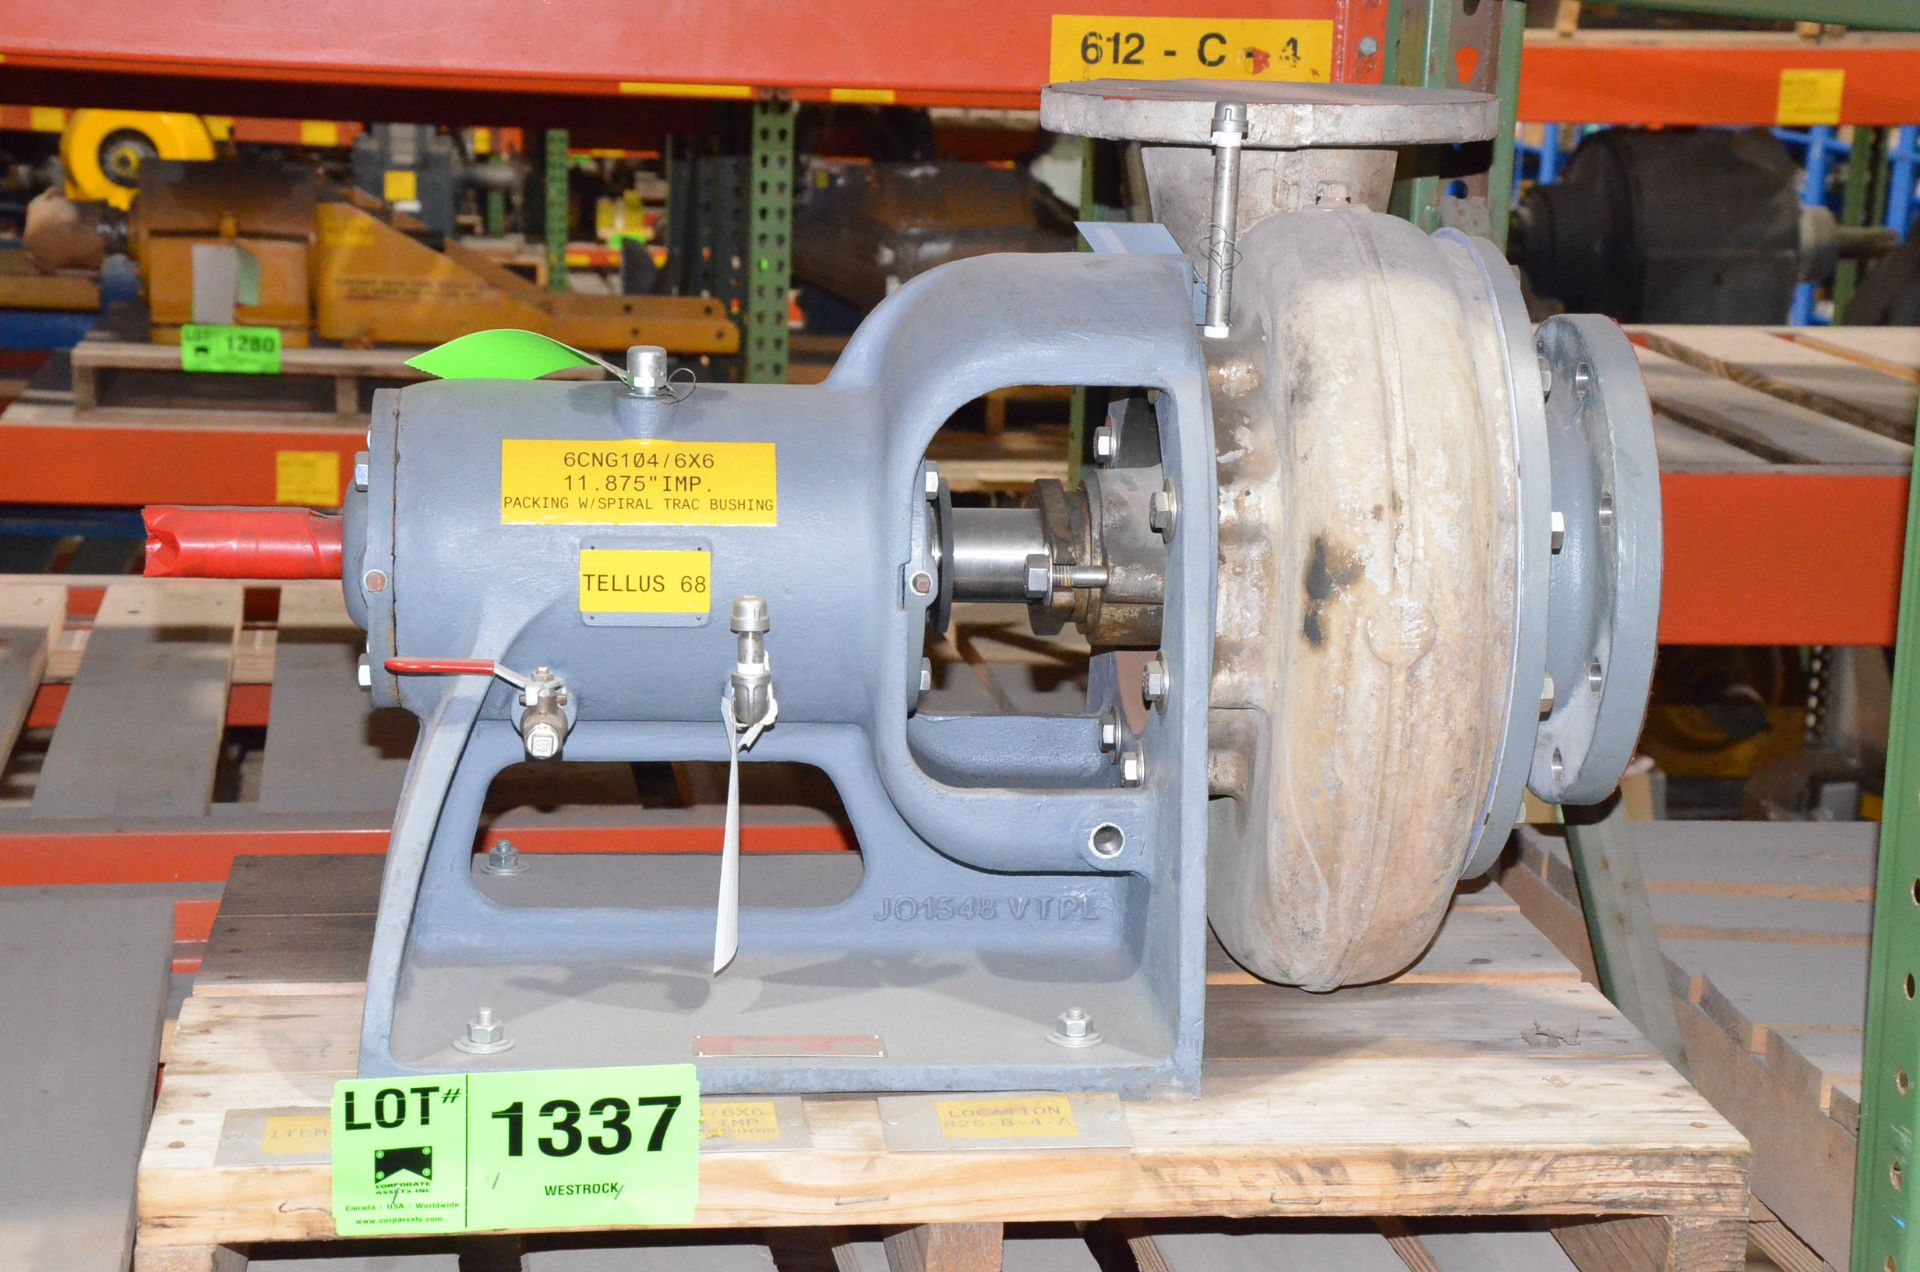 6CNG104/6X6 SS CENTRIFUGAL PUMP SIZE 6X6 WITH 11.875" IMPELLER